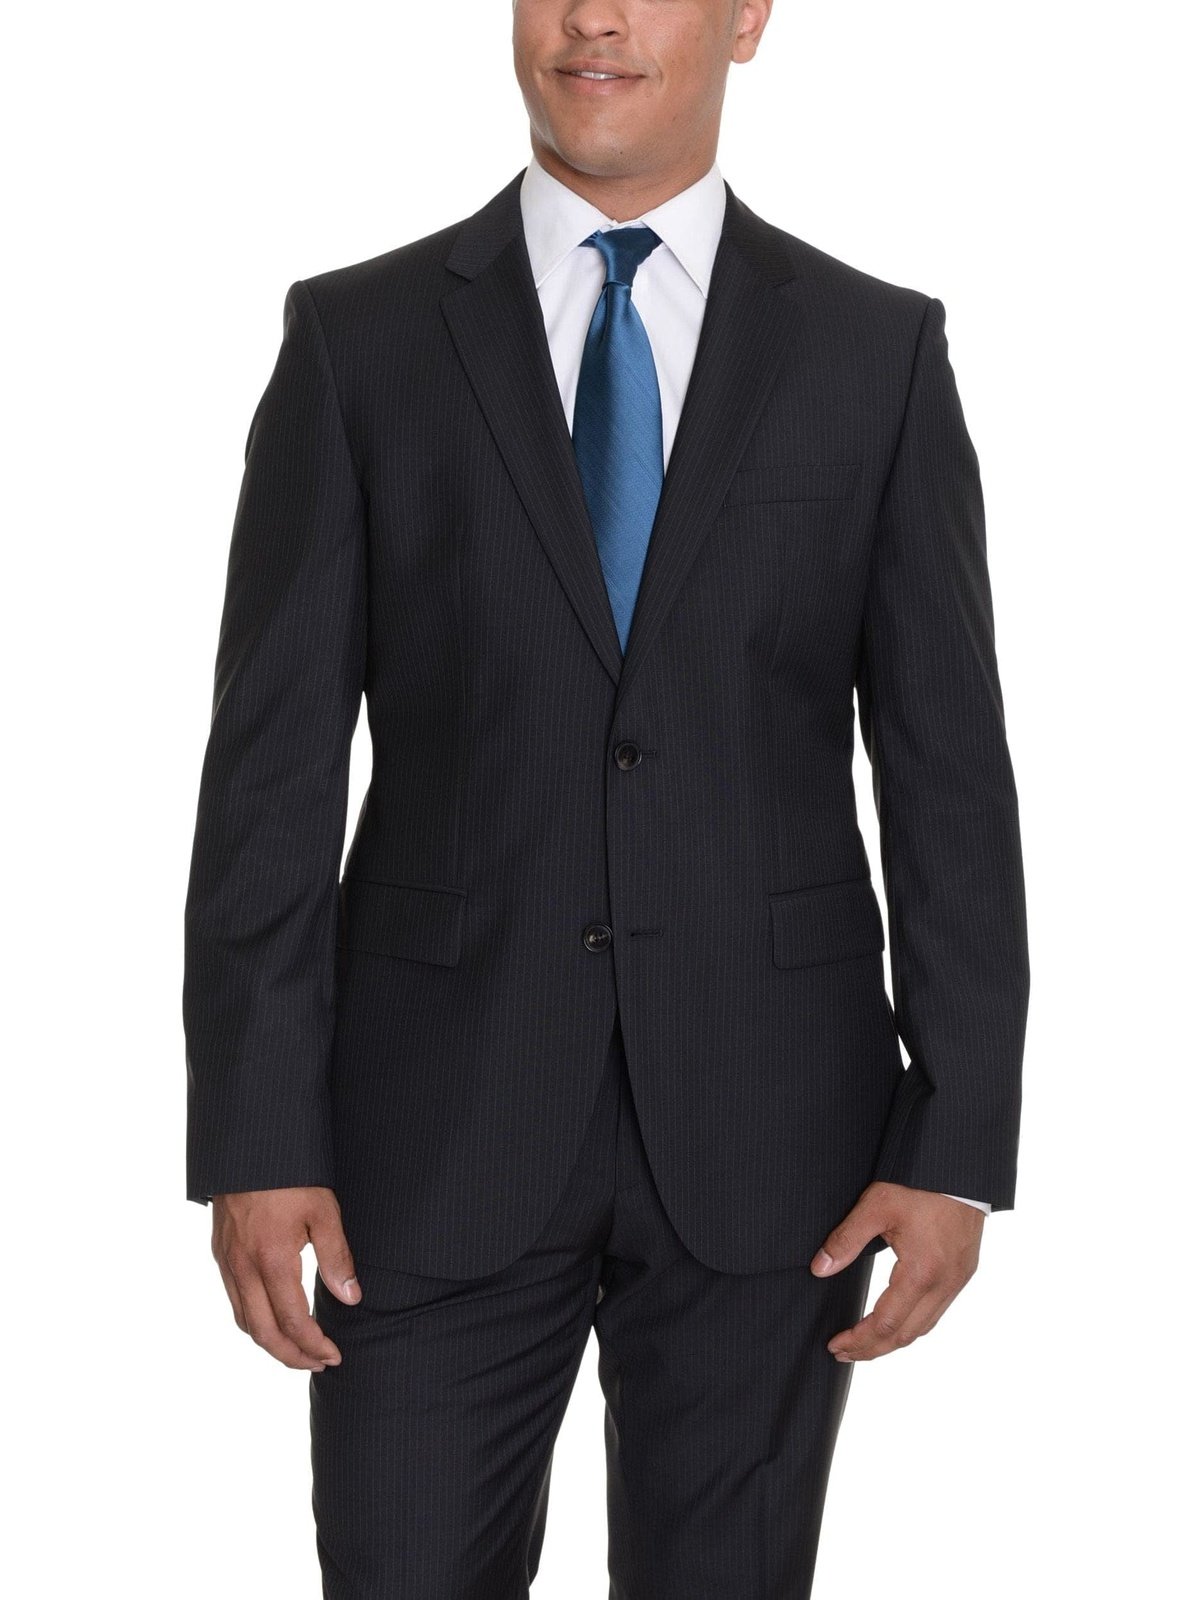 Vegetales referir lago Titicaca HUGO BOSS The Grand/Central Black Striped Two Button Wool Suit | The Suit  Depot